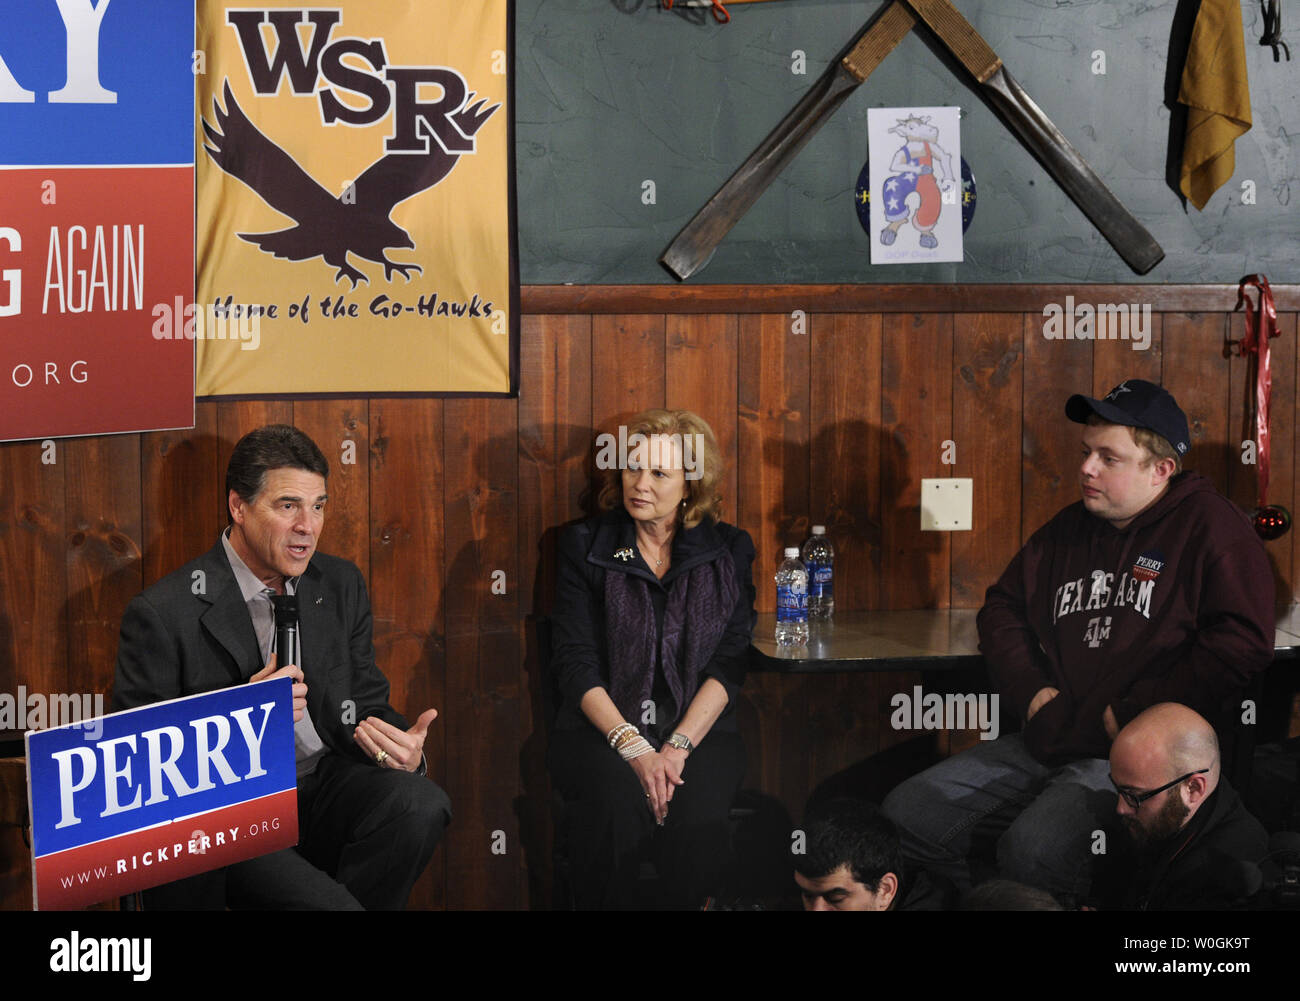 Republican 2012 presidential candidate and Texas Gov. Rick Perry responds to a quesstion as his wife Anita and Robert Loewen of Minneapolis, Minnesota, listen during a campaign stop at The Fainting Goat Bar and Grill in Waverly, Iowa, December 30, 2011, in advance of Iowa's first-in-the-nation caucuses, January 3,2012.    UPI/Mike Theiler Stock Photo